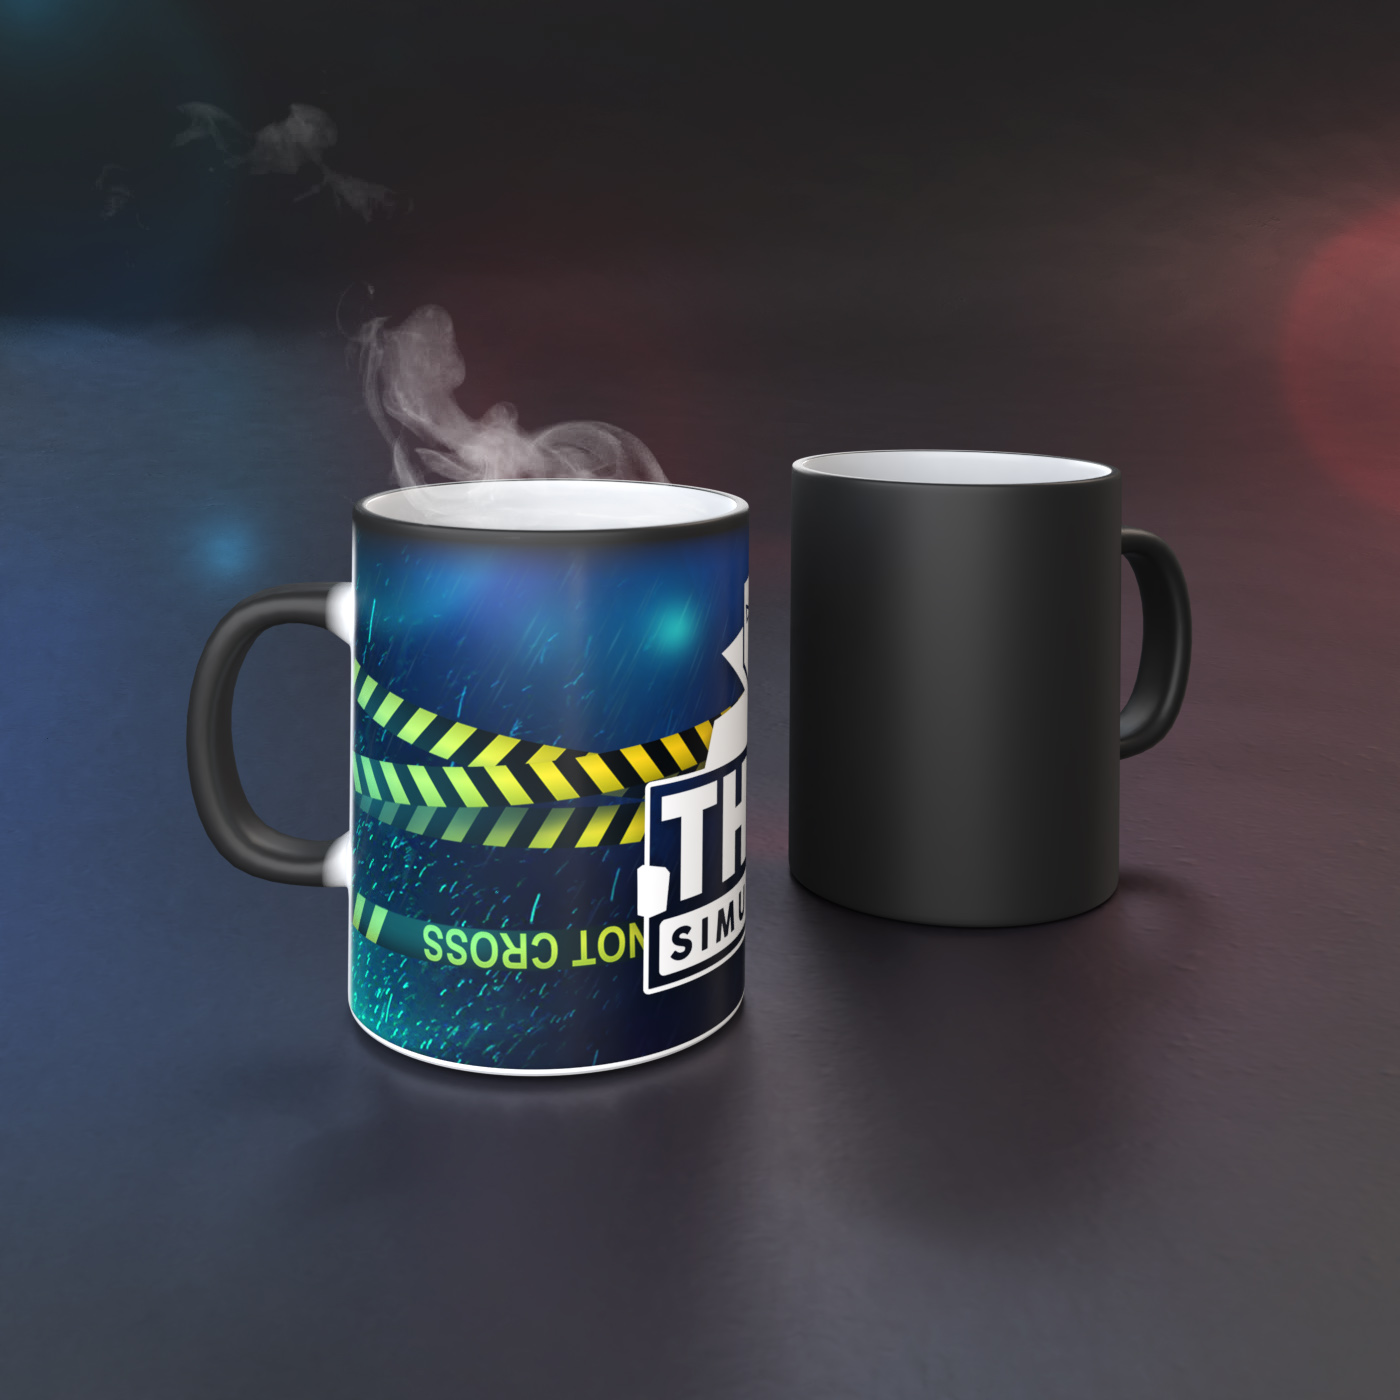 Magic Mug - Thief Simulator #2 - Forever Limited - Forever Yours!